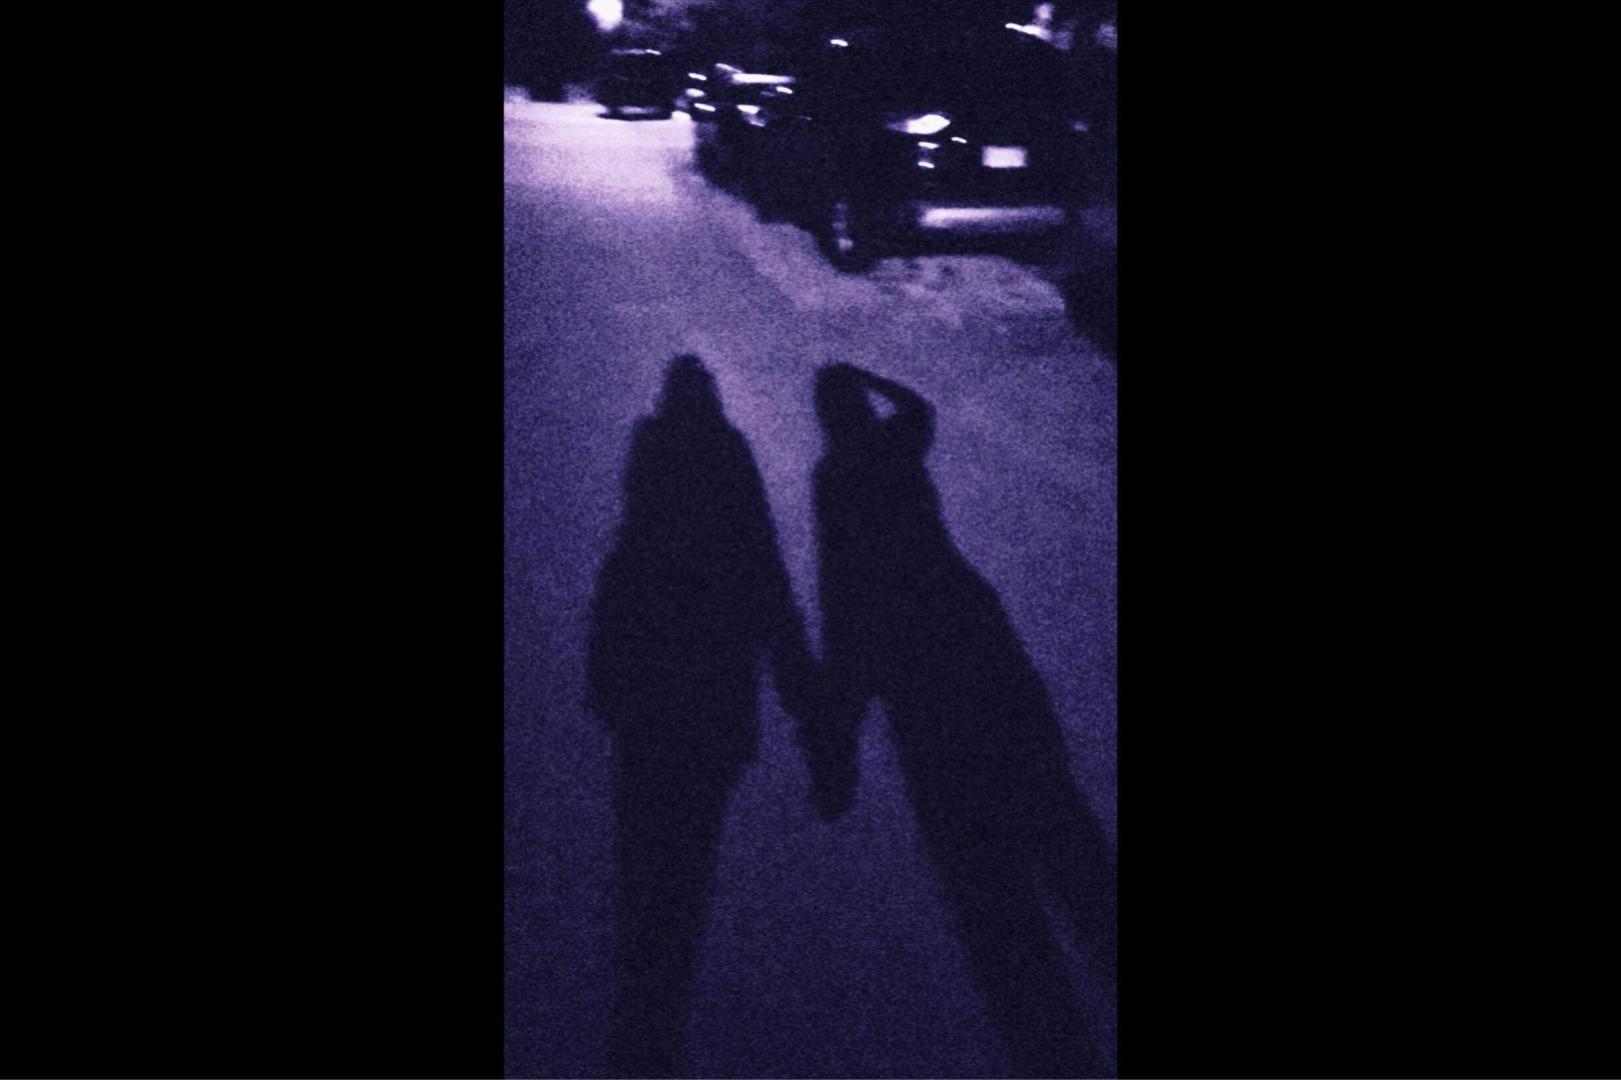 Shadow of two figures on the road.